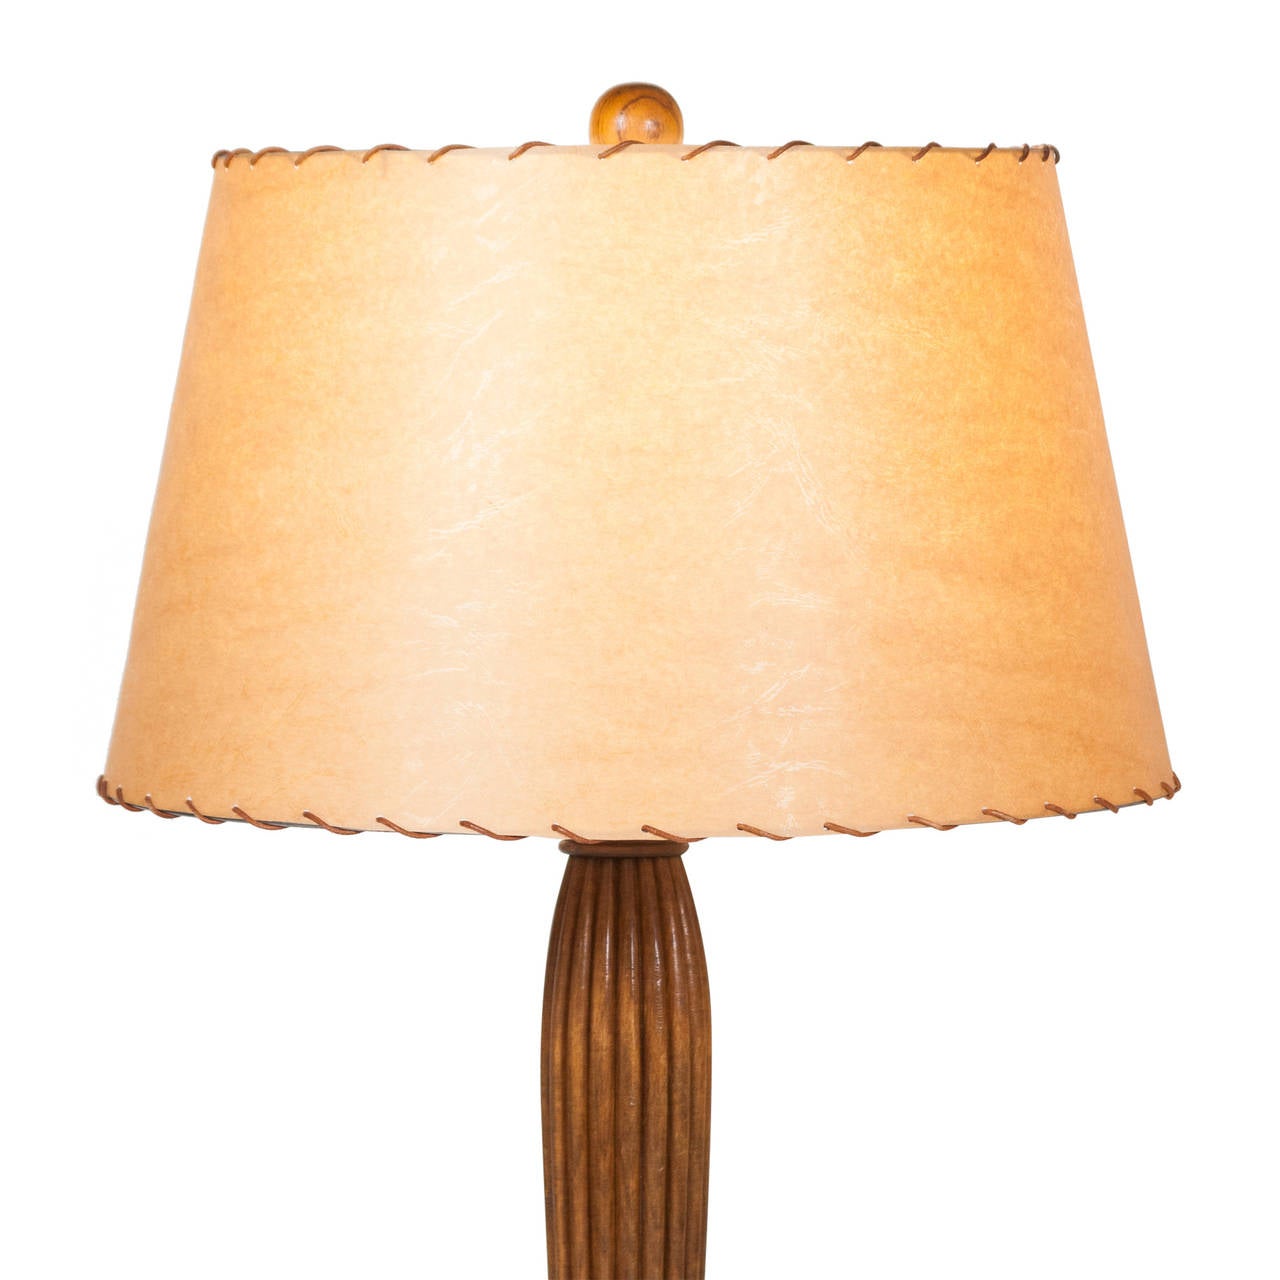 Italian Fluted Column Fruitwood Table Lamps, Pair For Sale 3